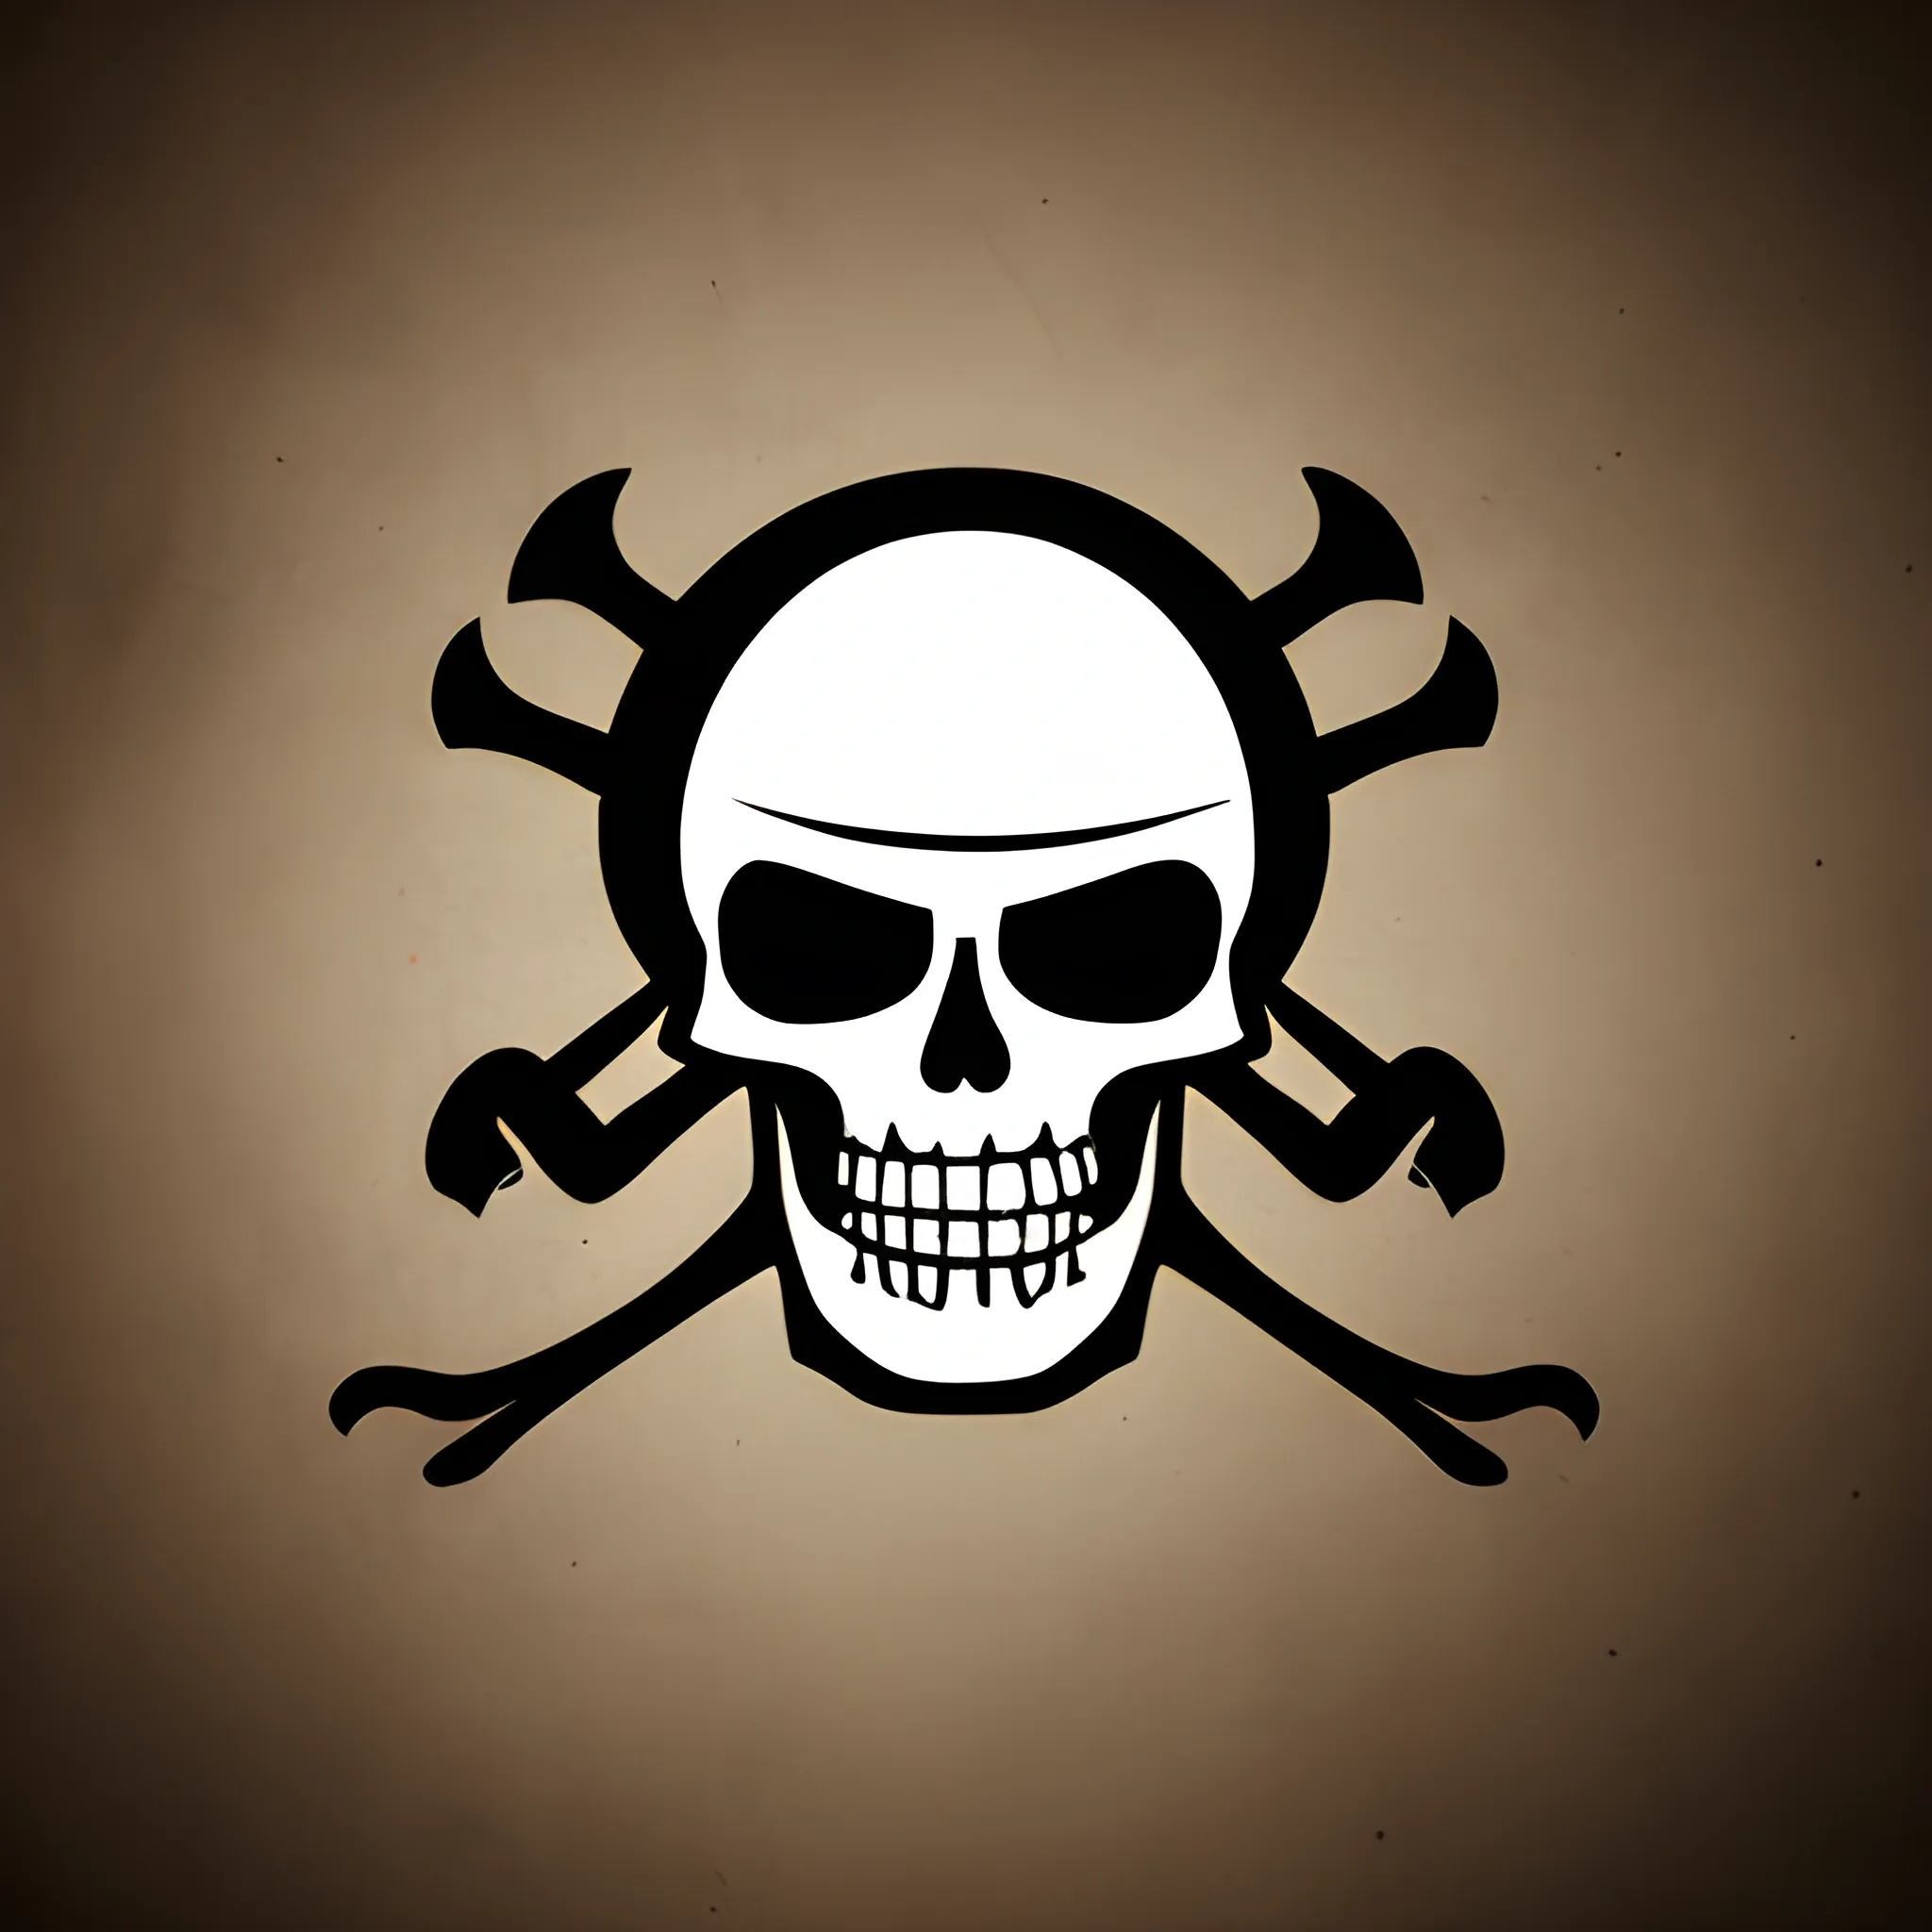 Pirate logo with bunch of arms